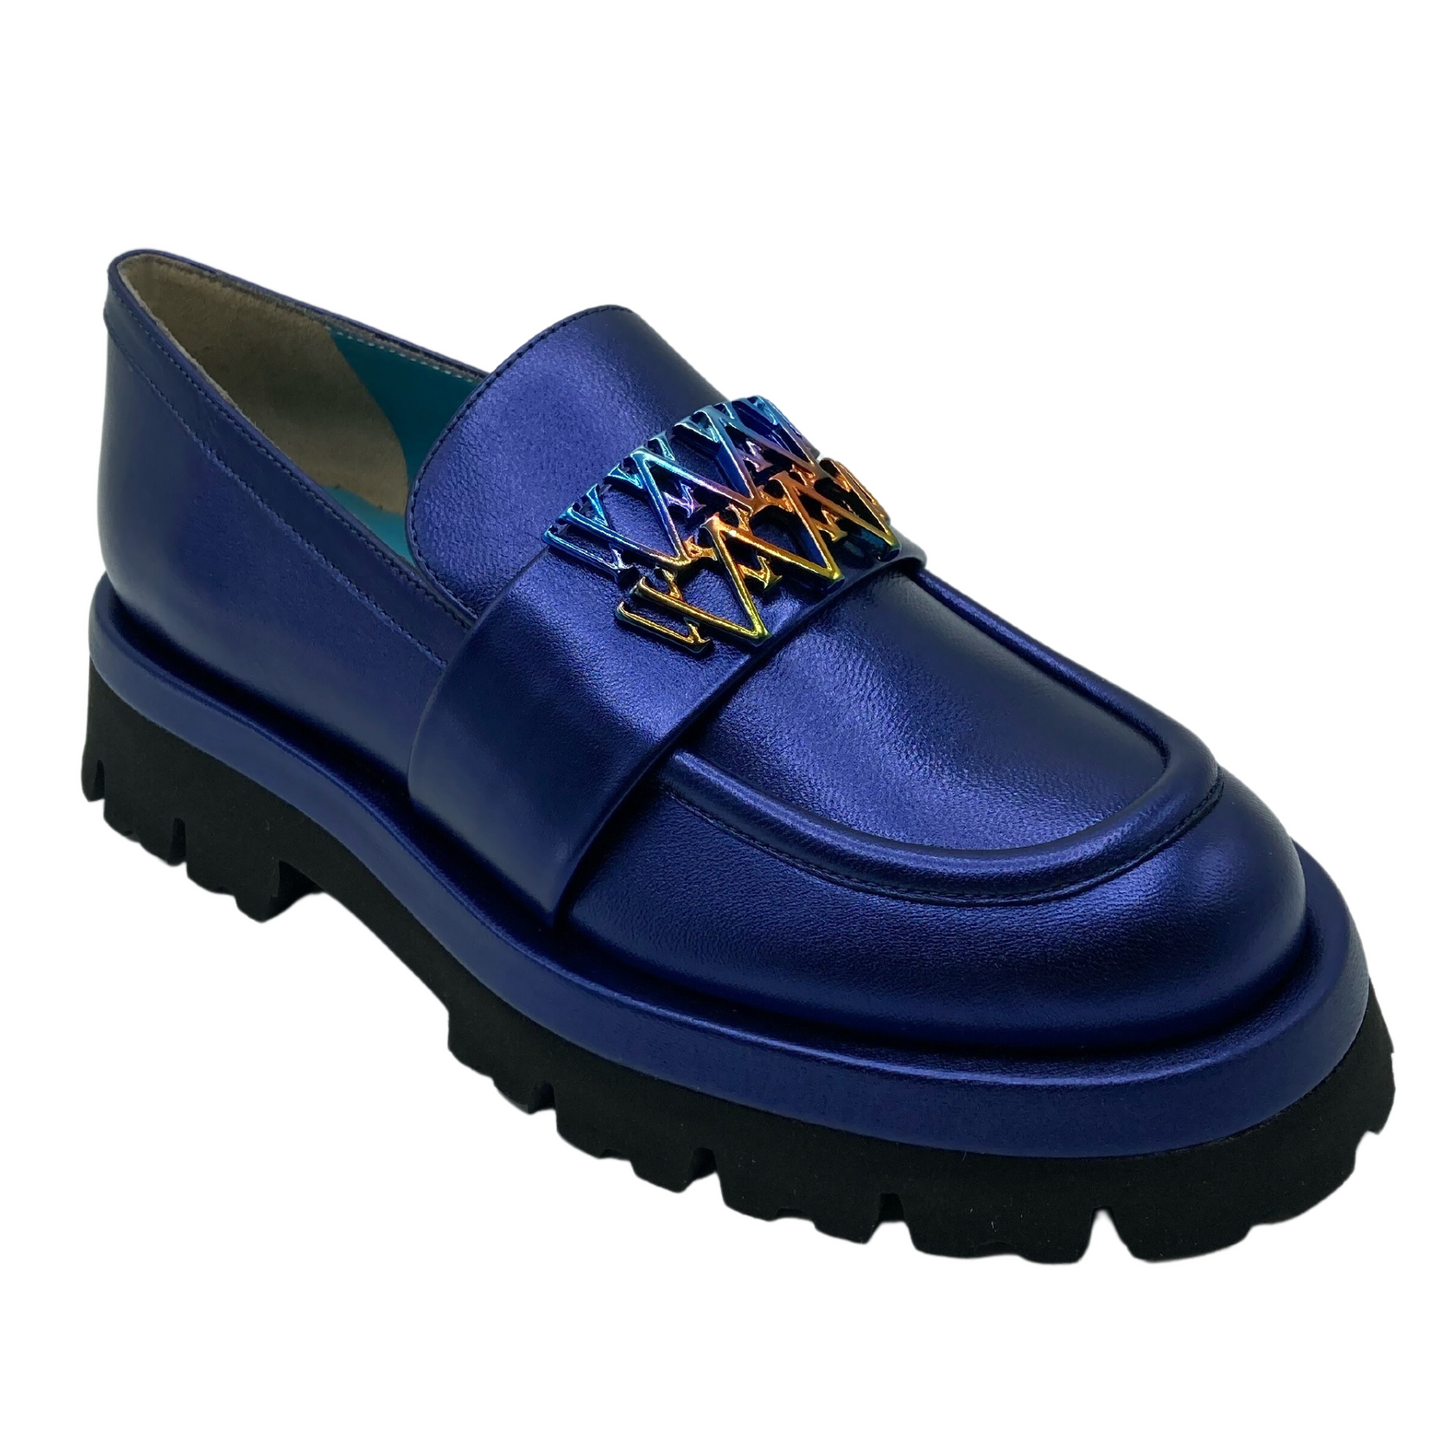 45 degree angled view of blue leather loafer with lugged rubber outsole and multicoloured detail on upper